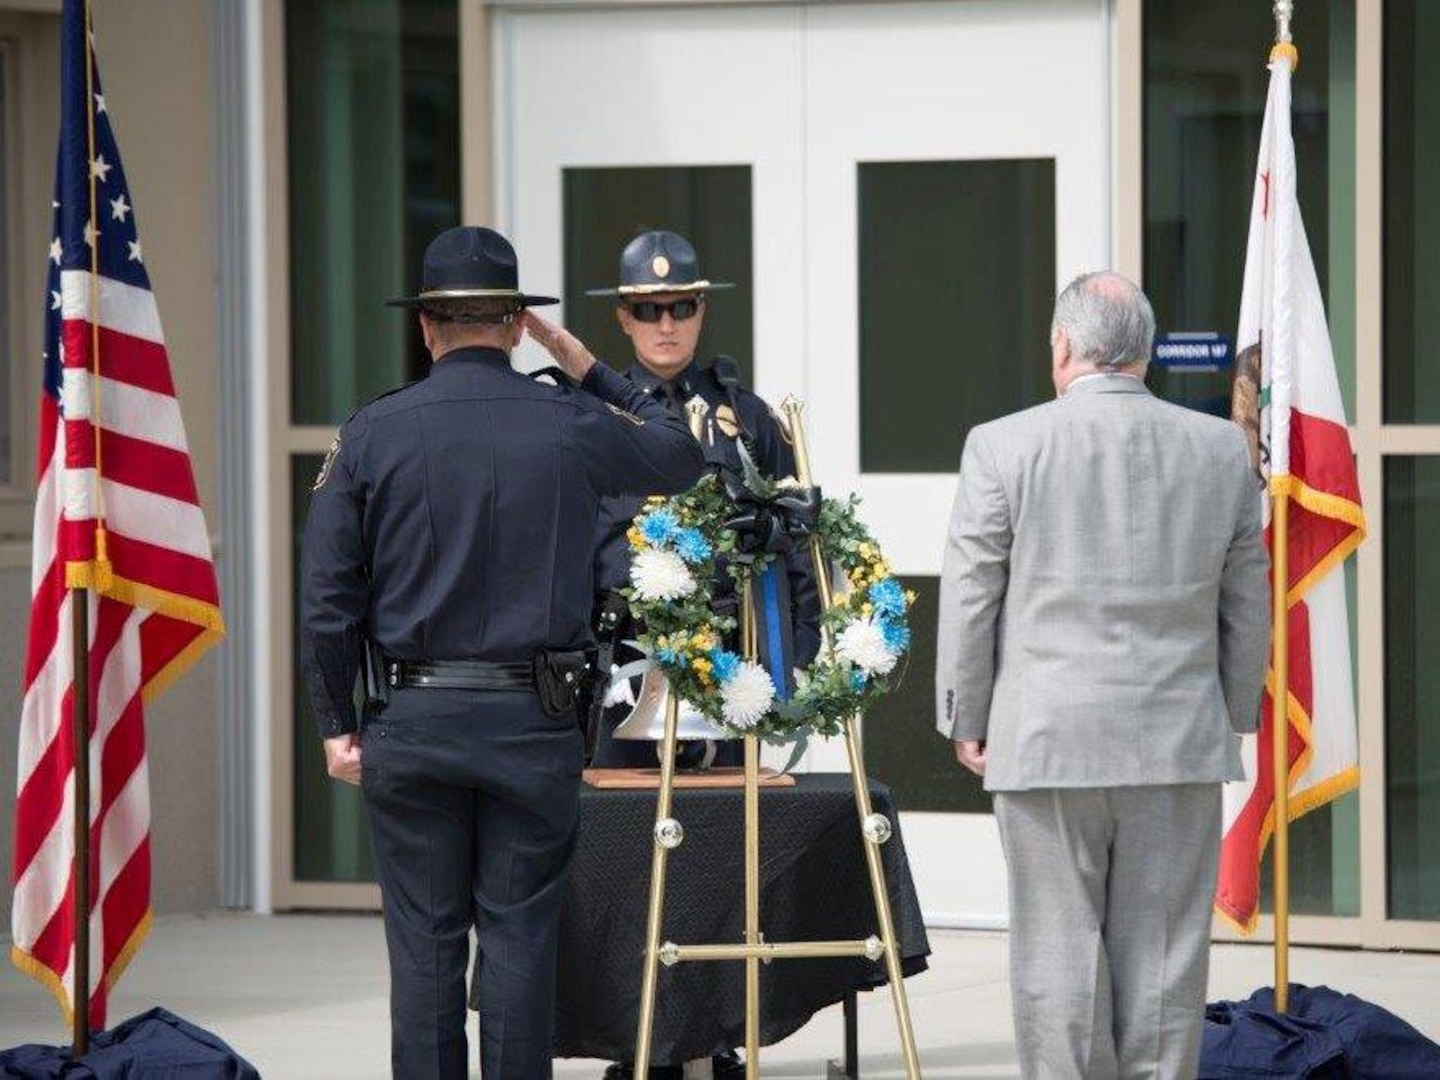 DLA Installation Support San Joaquin police chief John Vieira and site director Jonathan Mathews lay the wreath at the base of the ceremonial bell in honor of law enforcement officers killed in the line of duty.  